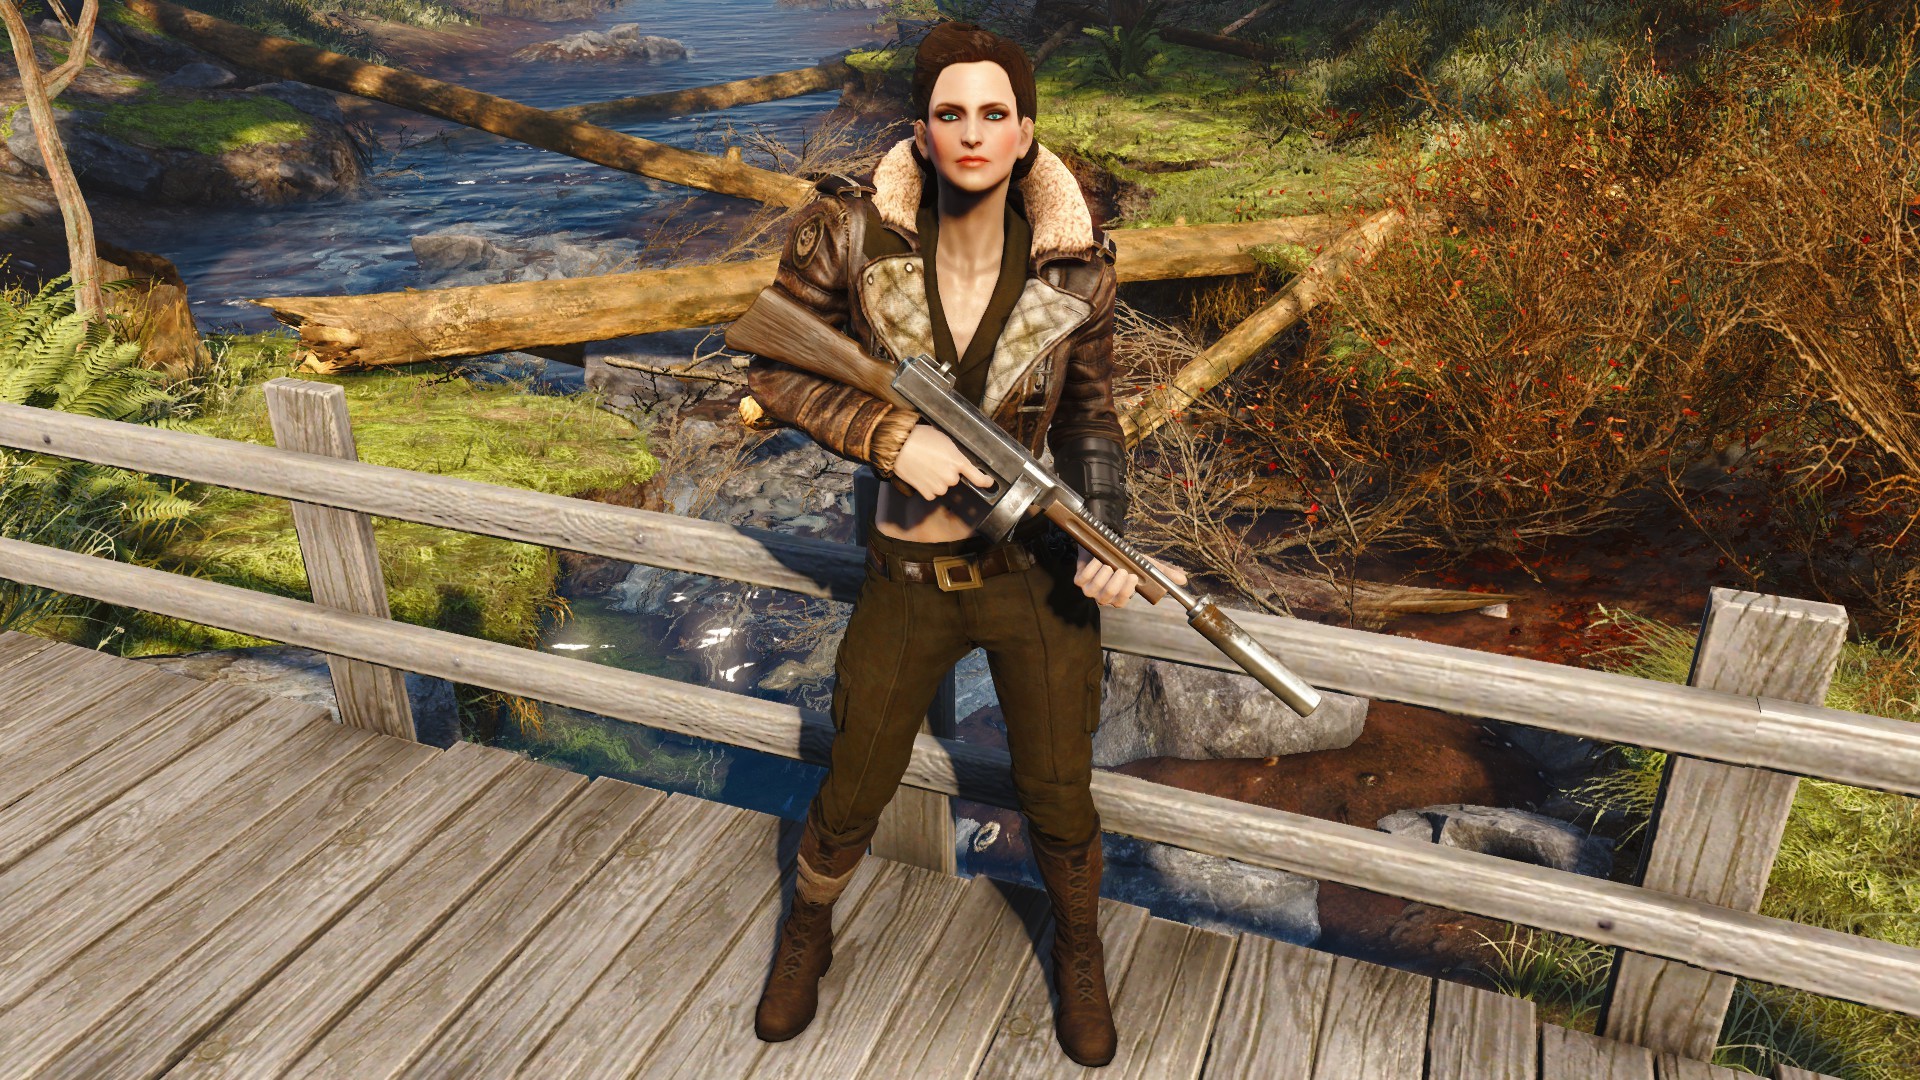 Military Pin Up Outfit Pack (awkcr Ae) At Fallout 4 - Fallout Pin Up - HD Wallpaper 